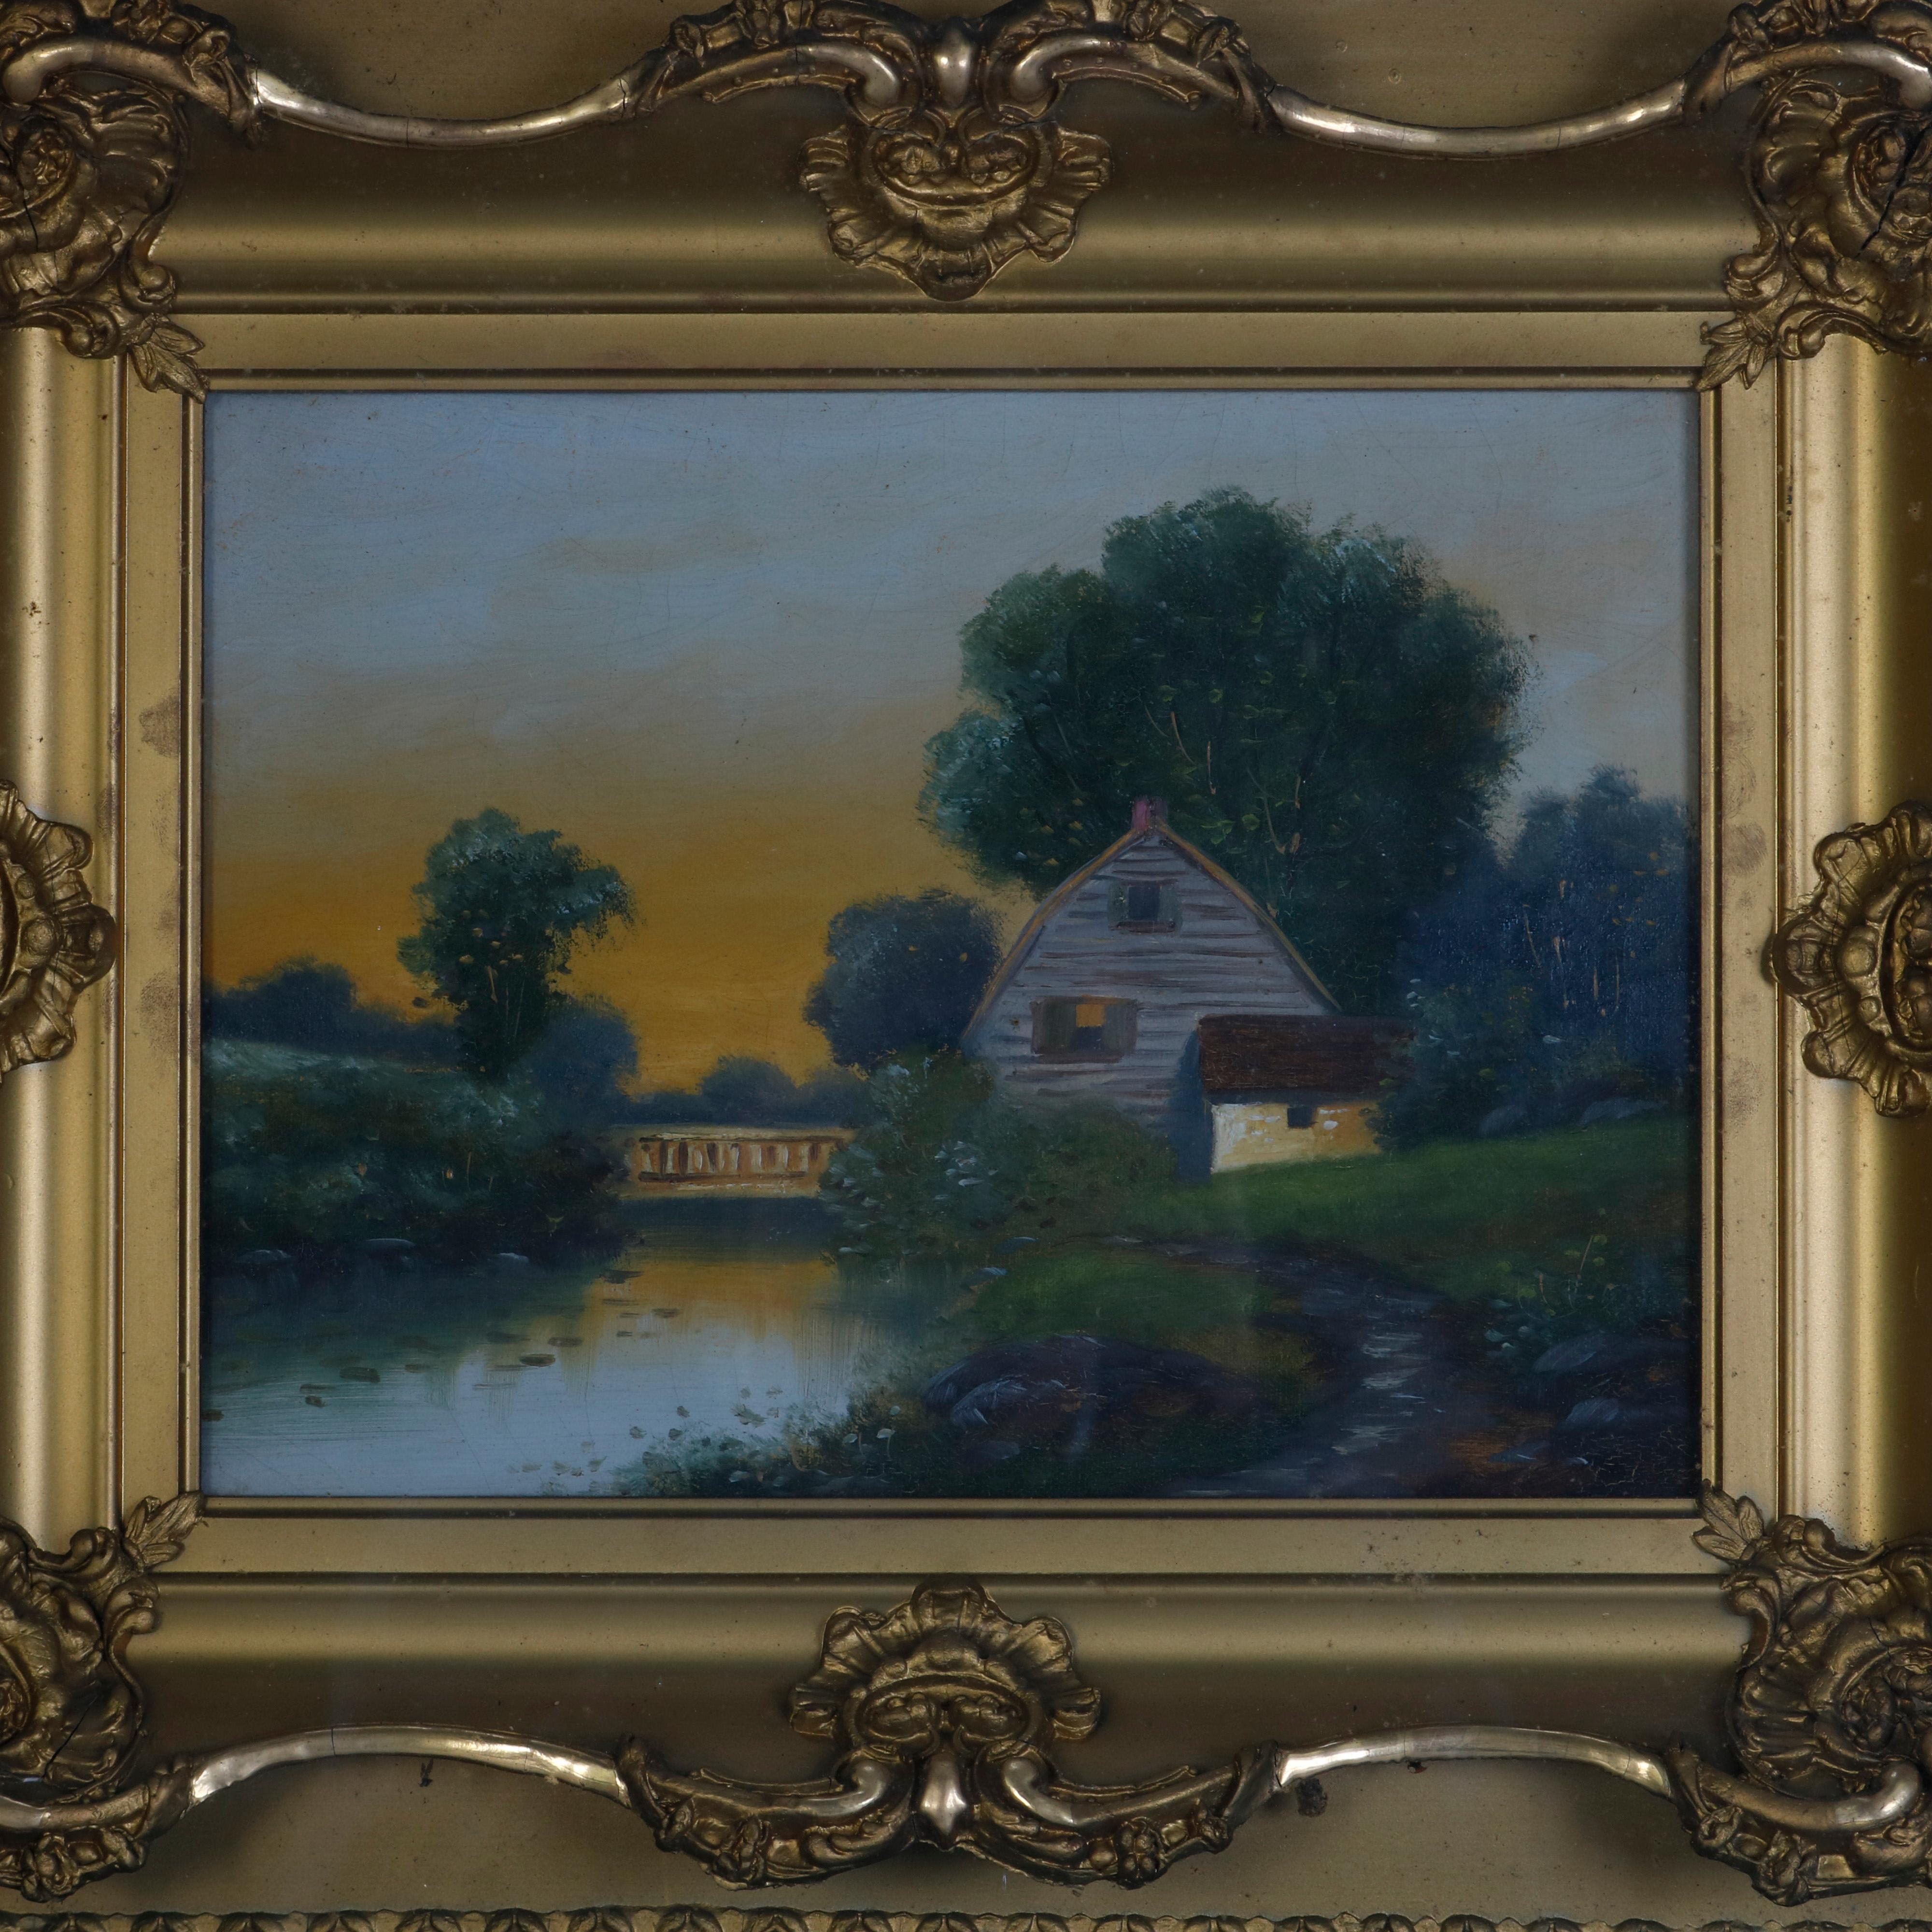 An antique oil on canvas landscape painting depicts farmhouse in countryside setting with creek and bridge, seated in giltwood shadowbox, circa 1900

***DELIVERY NOTICE – Due to COVID-19 we are employing NO-CONTACT PRACTICES in the transfer of